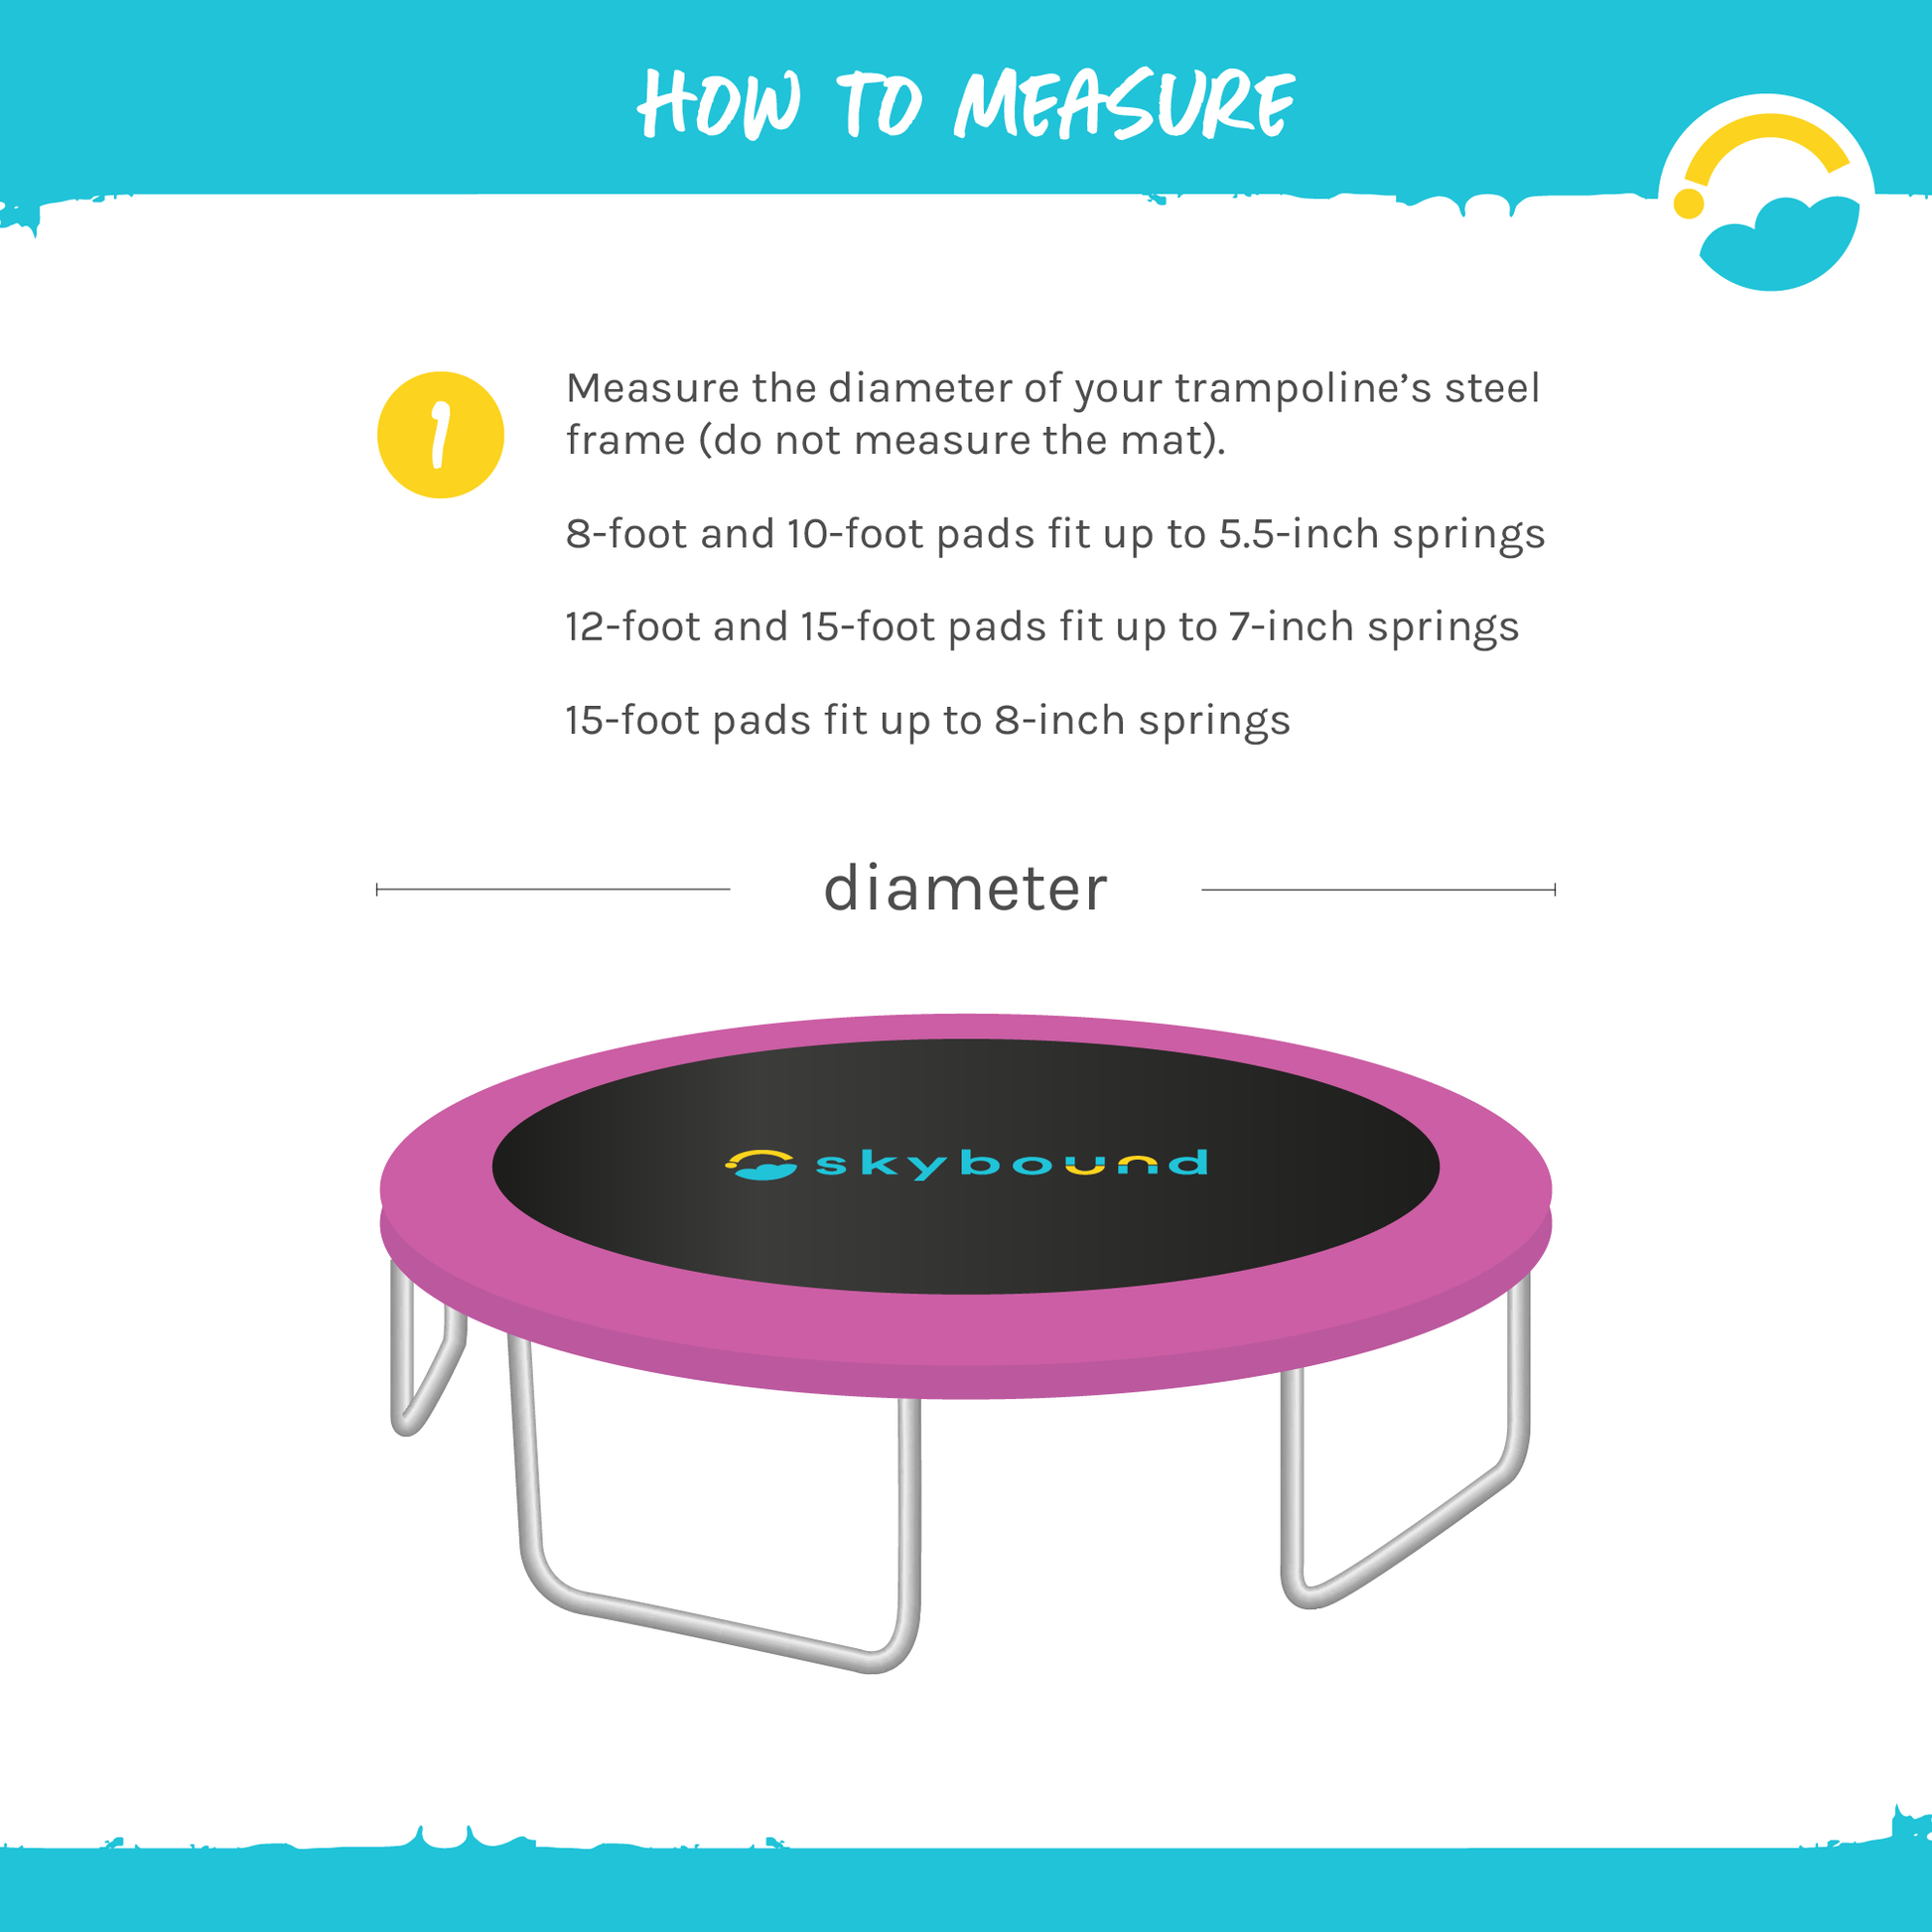 How to measure Trampoline Pad. Measure the diameter of your trampoline's steel frame (do not measure the mat), 8-foot and 10 foot pads fit up to 5.5-inch springs. 12-foot and 15 foot pads fit up to 7-inch springs, 15-food pads fit up to 8-inch springs.